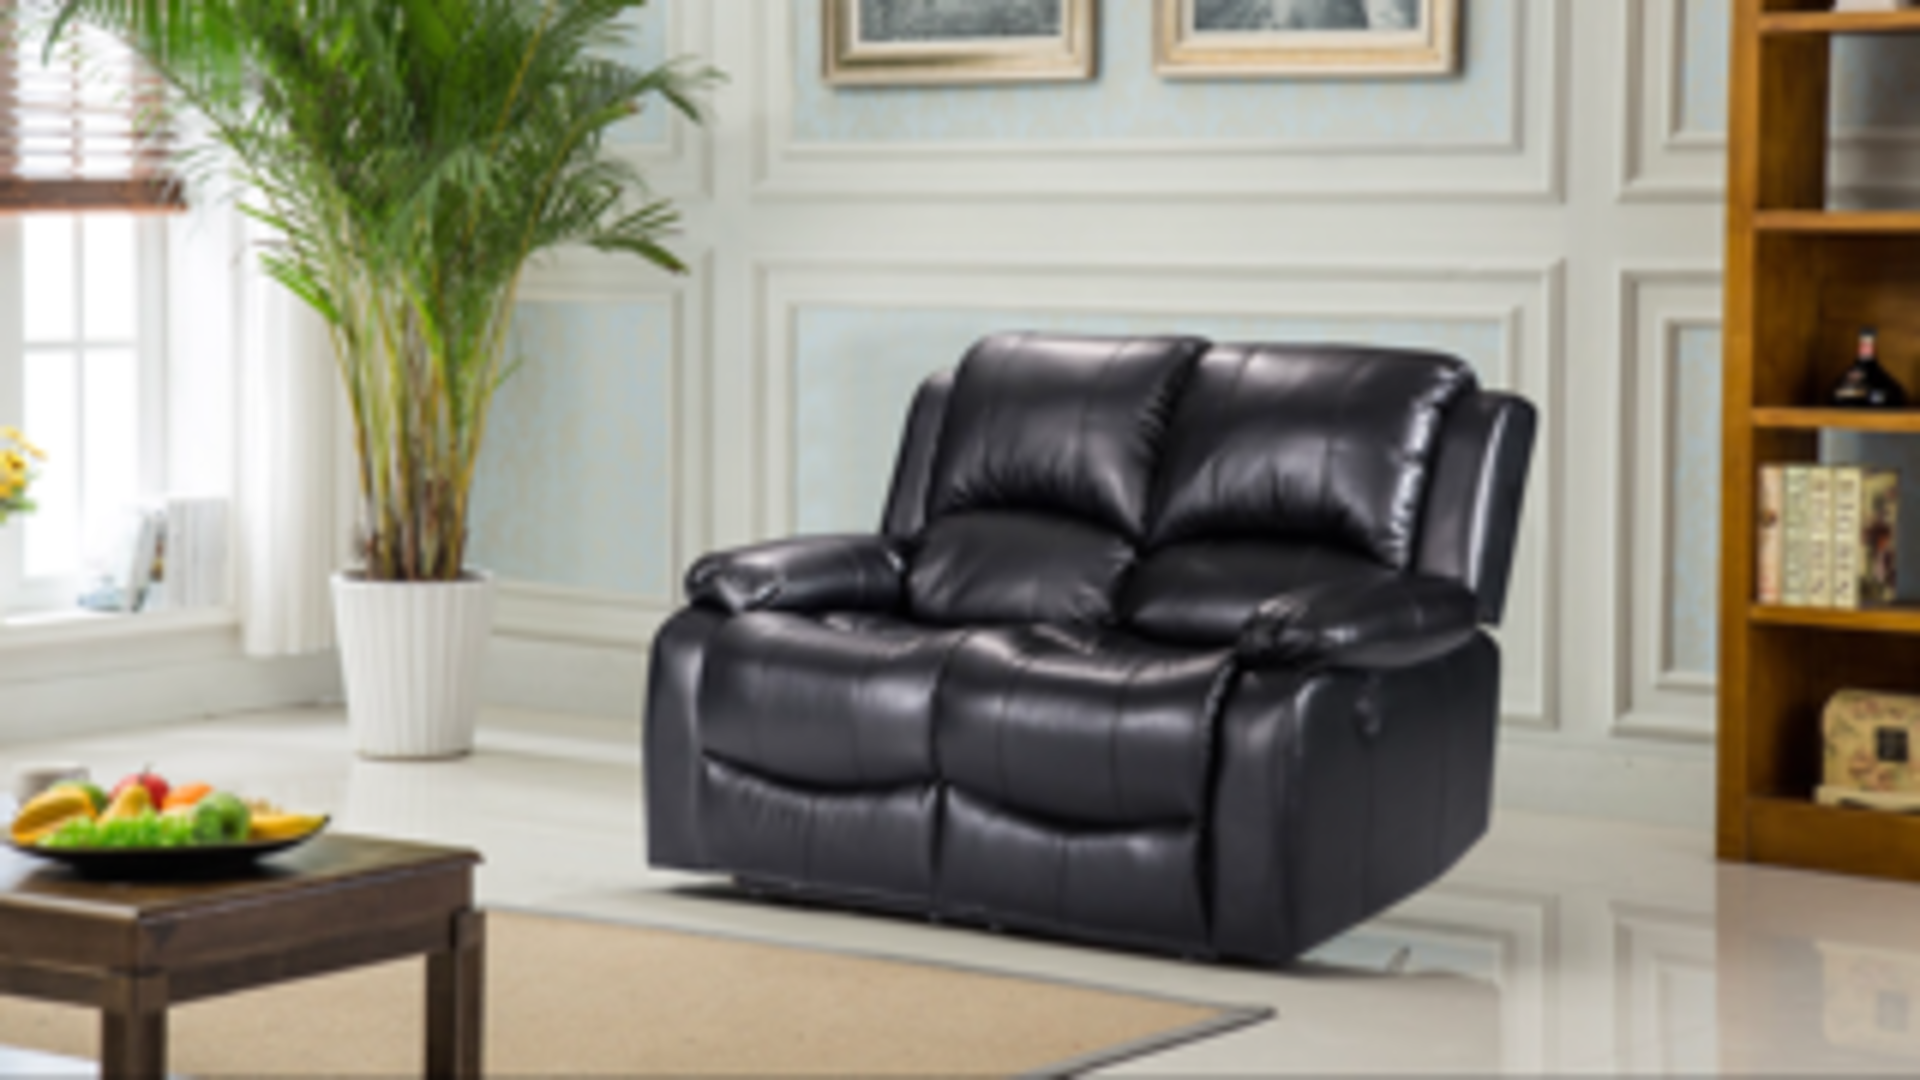 Brand new boxed Vancouver 3 seater plus 2 seater black leather reclining sofas - Image 2 of 3